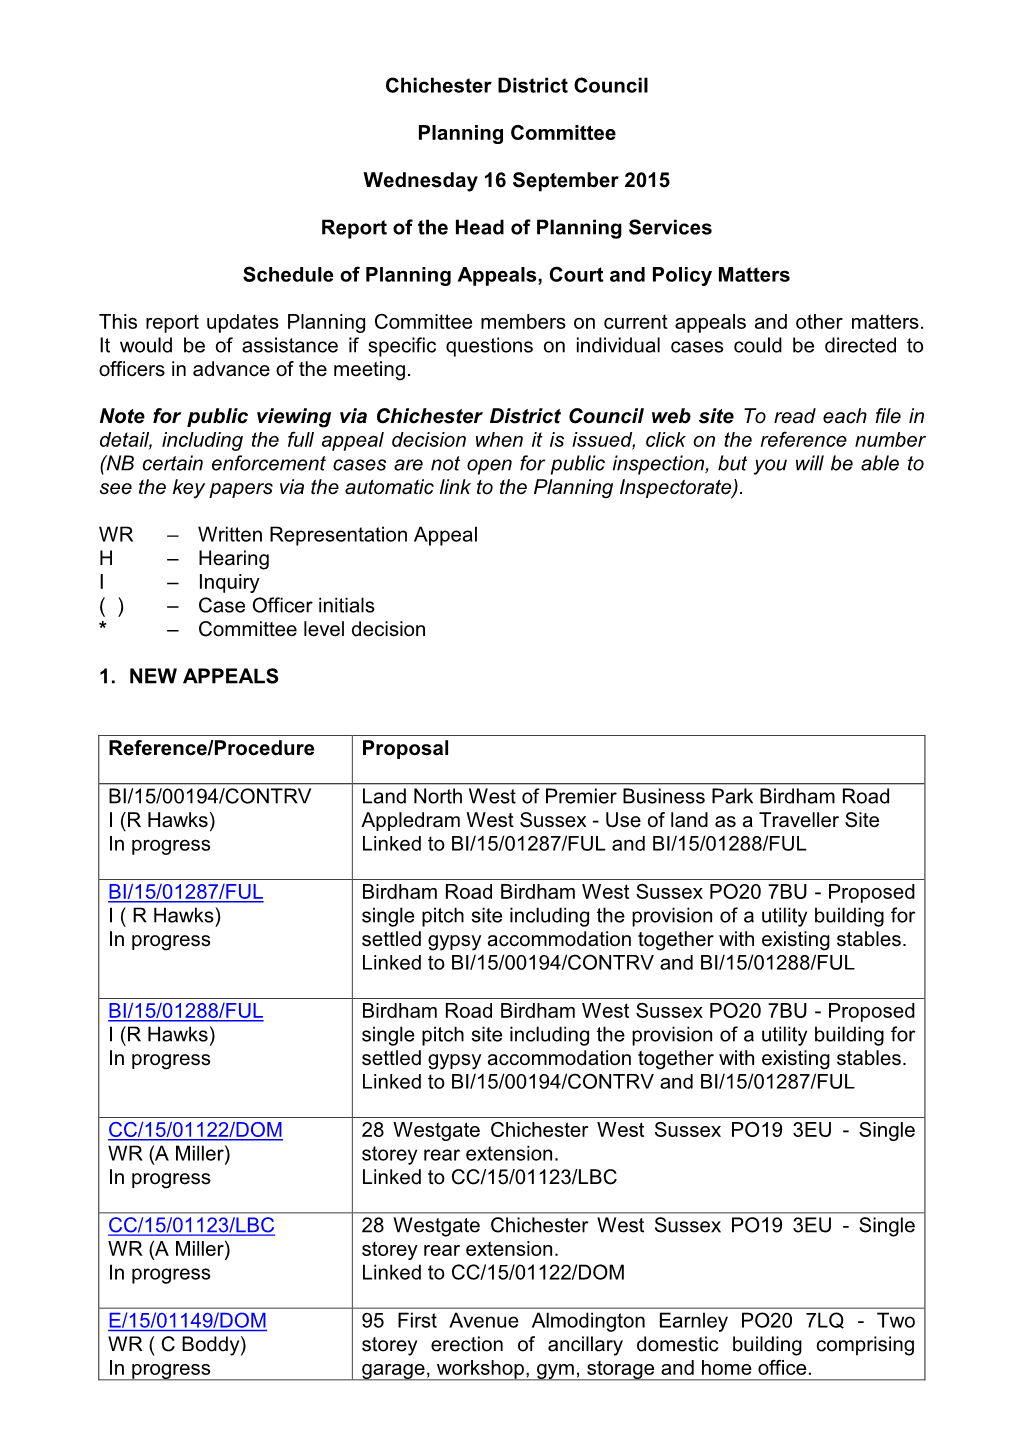 Chichester District Council Planning Committee Wednesday 16